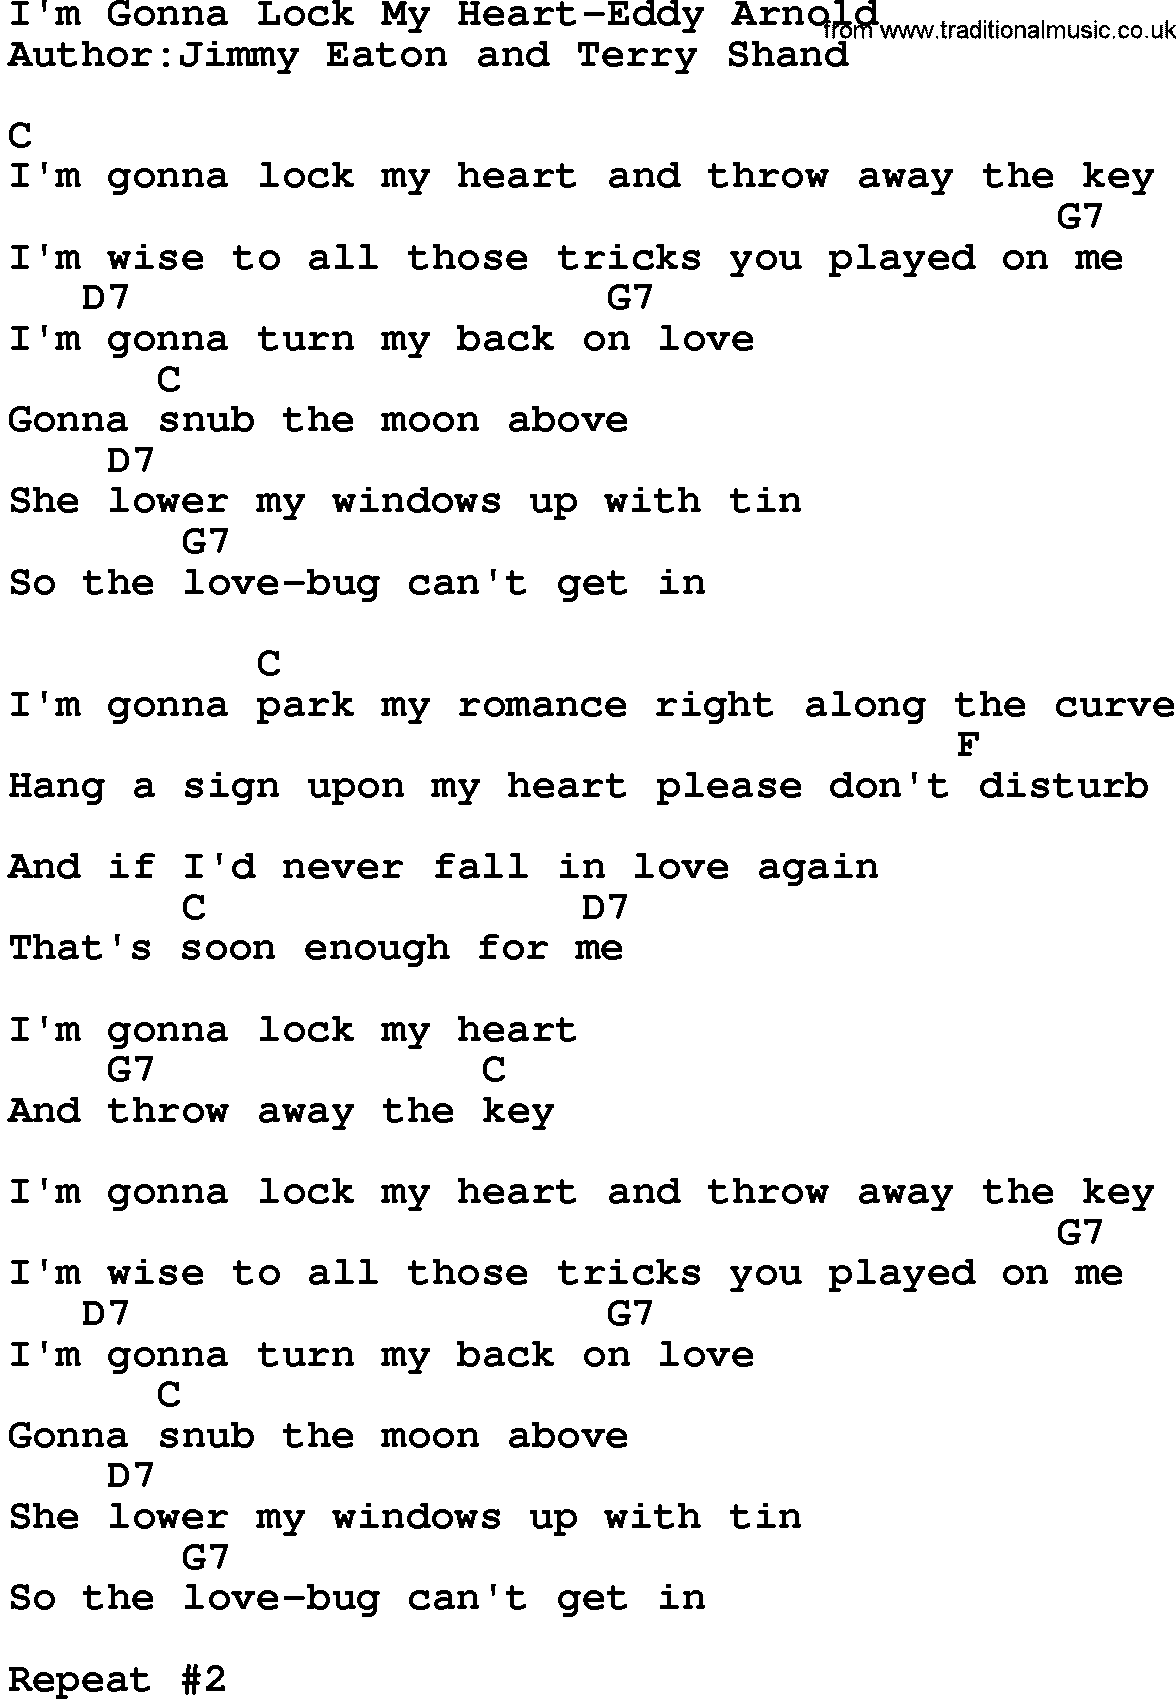 Country music song: I'm Gonna Lock My Heart-Eddy Arnold lyrics and chords